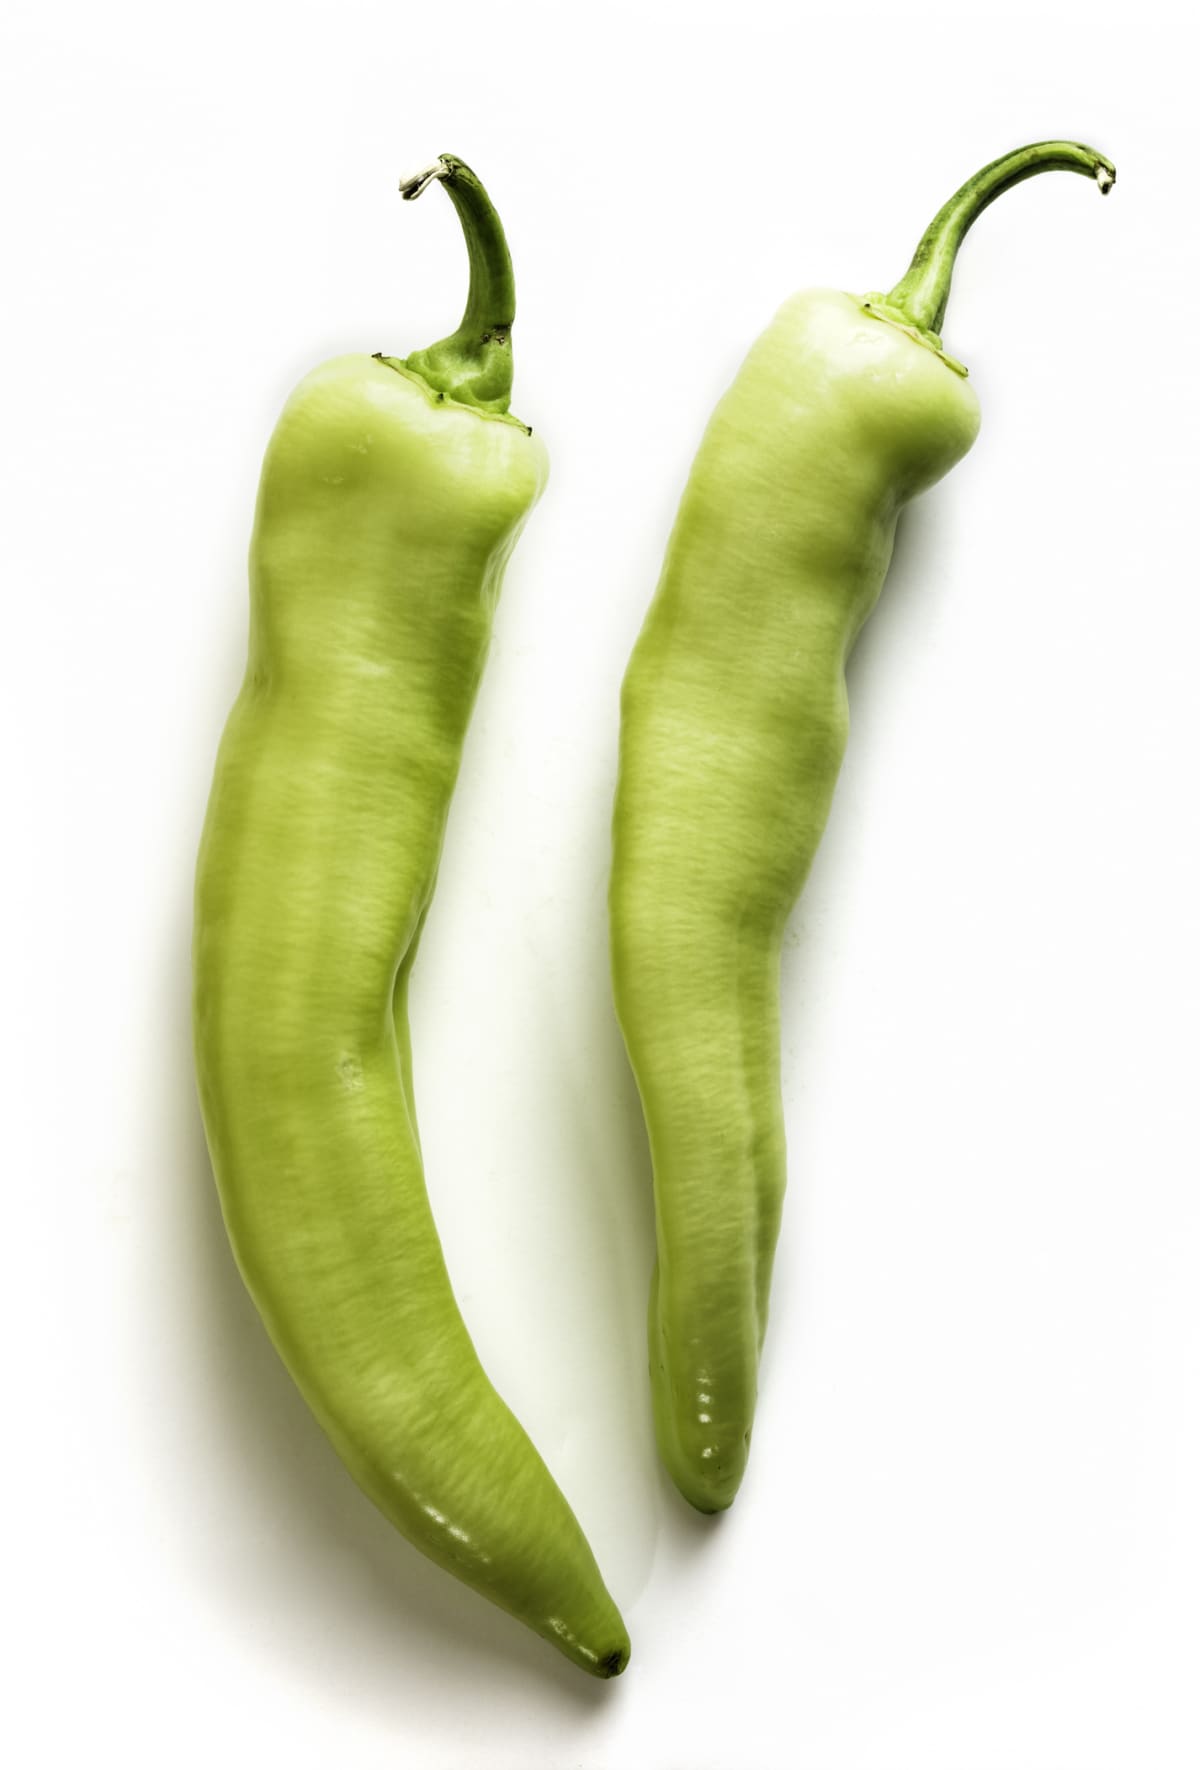 A closeup of fresh Banana peppers - perfect for food background